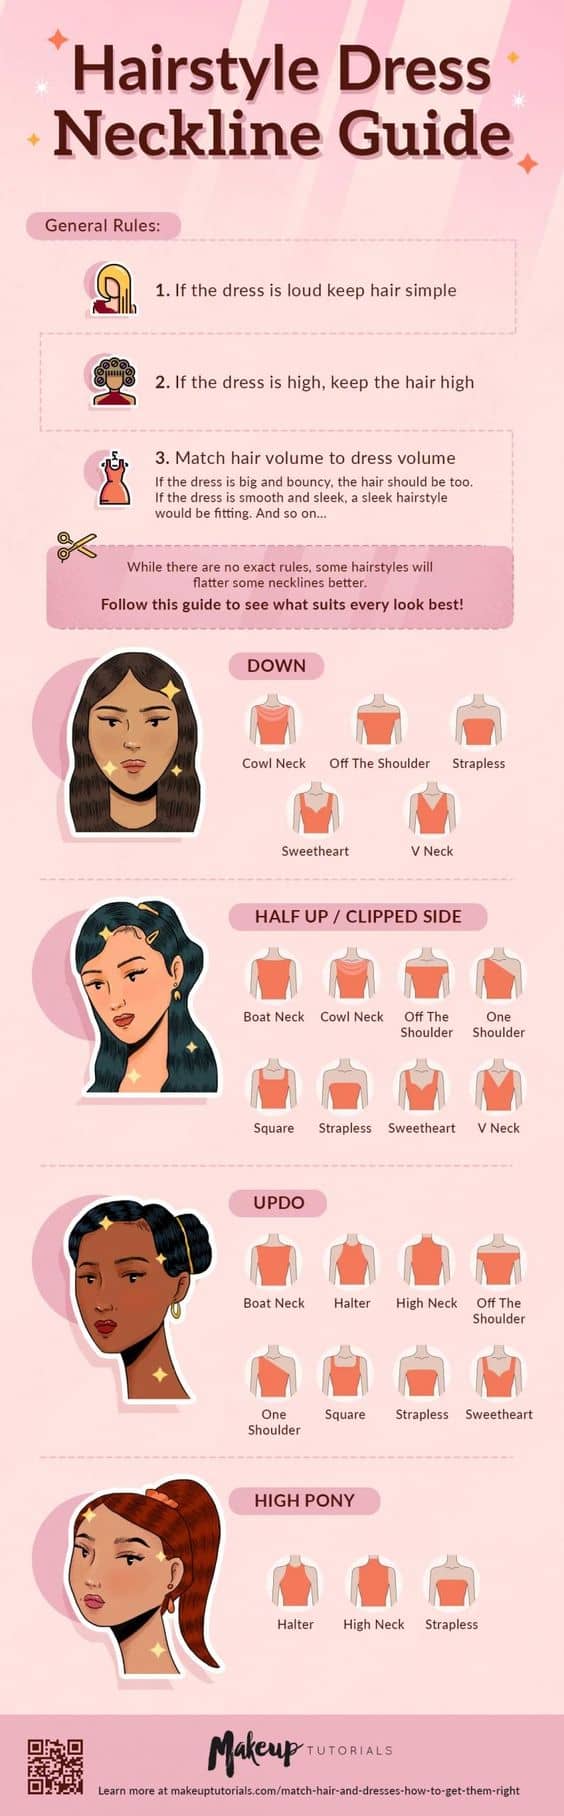 A Chic Guide To Matching Your Hair To Your Dress | Daily Infographic